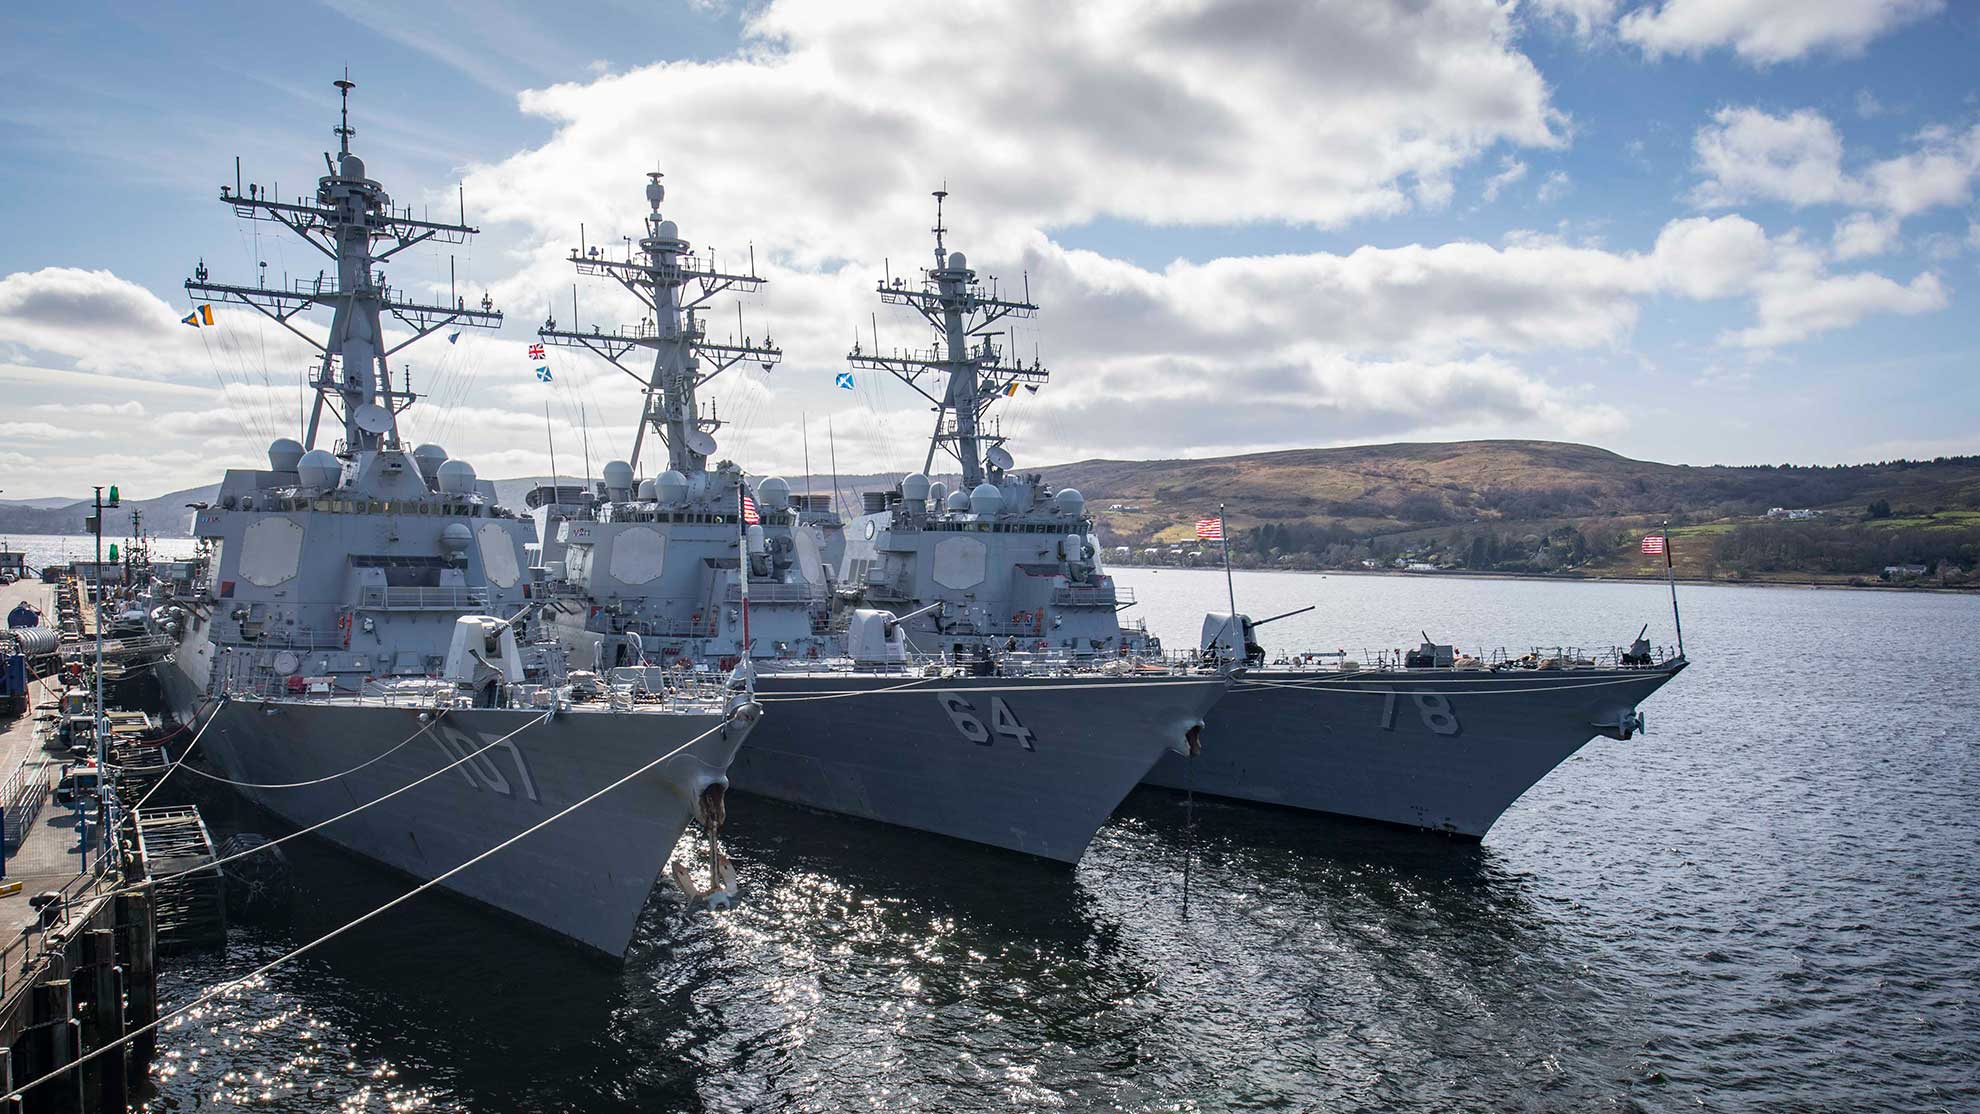 Faslane, Scotland (March 30, 2019) The Arleigh Burke-class guided-missile destroyers USS Gravely (DDG 107), USS Carney (DDG 64), and USS Porter (DDG 78) are moored at HMNB Clyde in Faslane, Scotland, March 30, 2019. Carney, forward-deployed to Rota, Spain, is on its sixth patrol in the U.S. 6th Fleet area of operations in support of regional allies and partners as well as U.S. national security interests in Europe and Africa -- U.S. Navy photo by MCS 1st Class Fred Gray IV. -